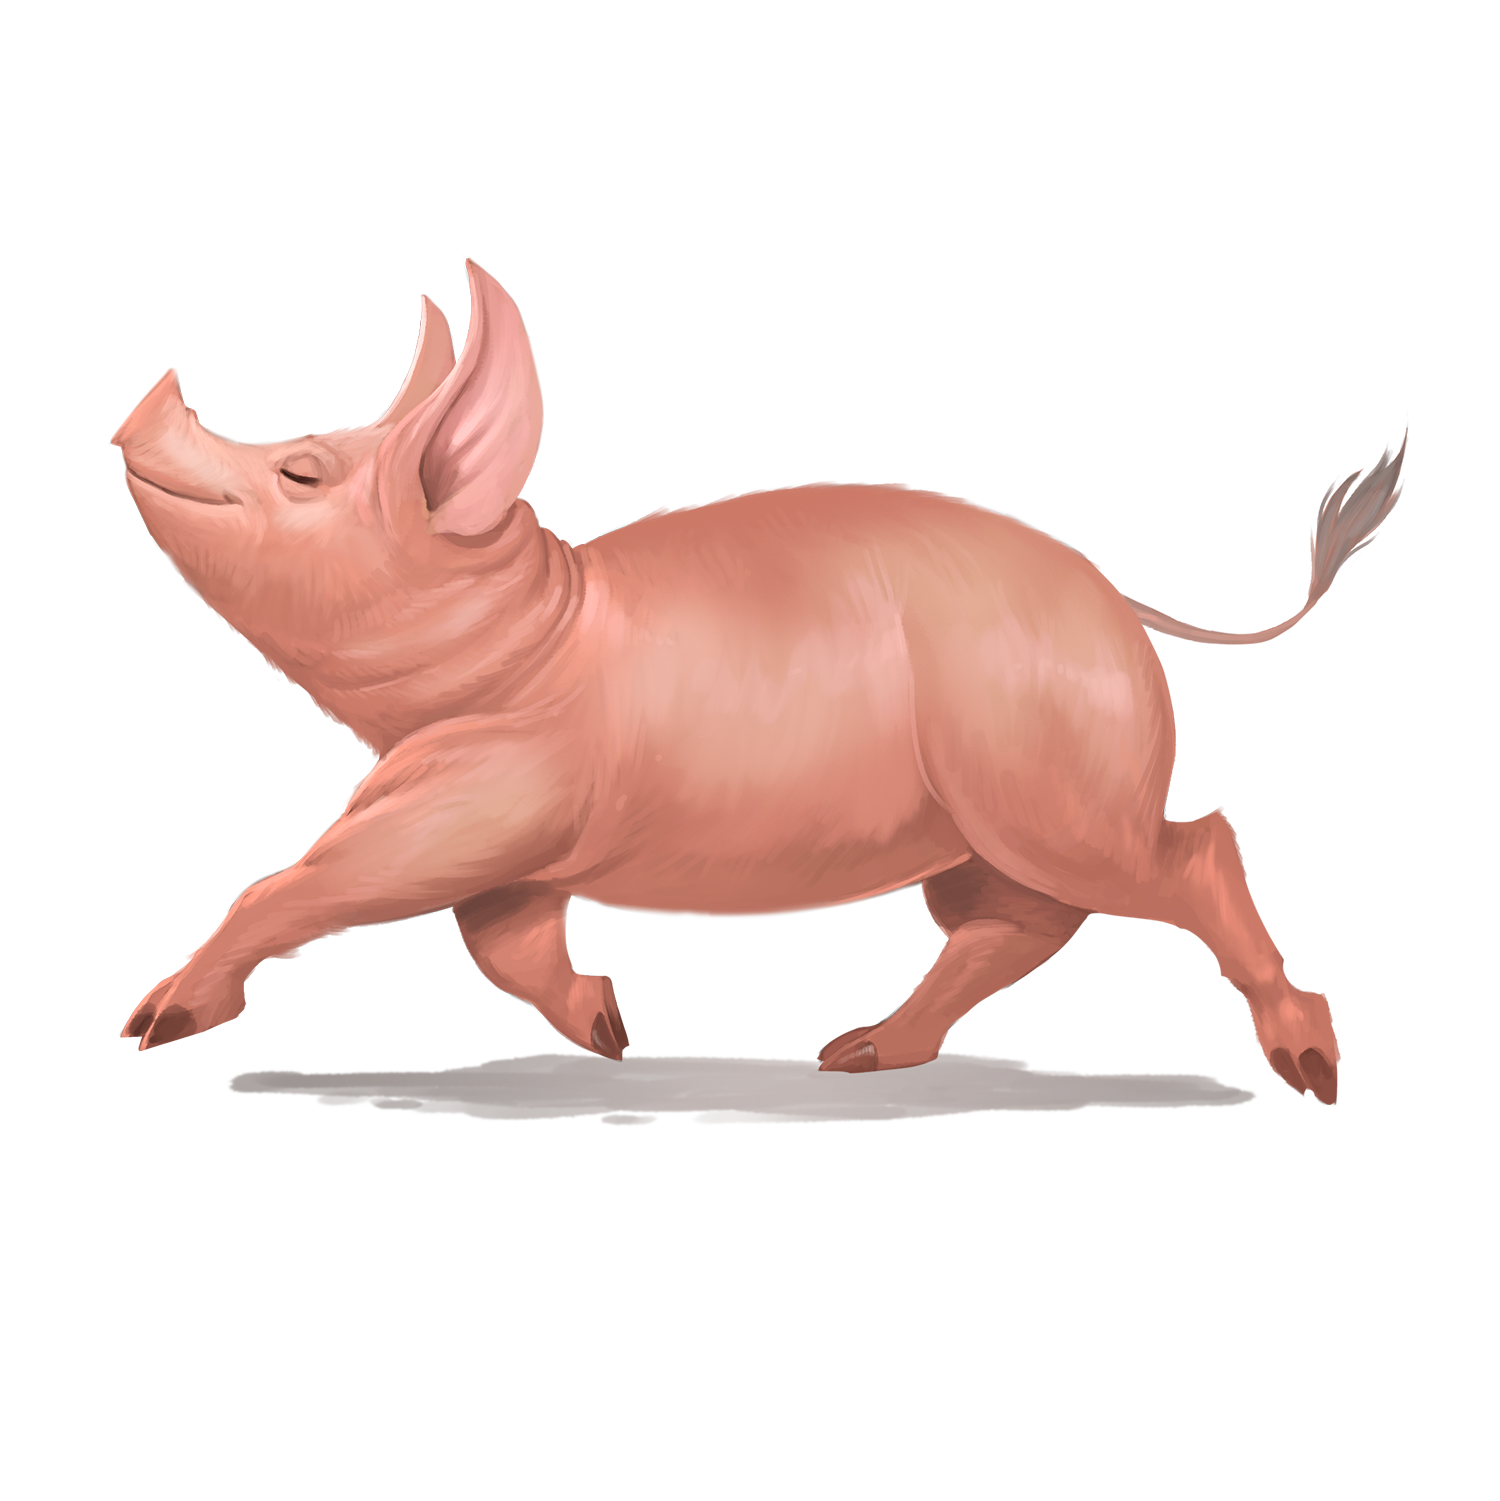 Illustration by Kiki Moch Rizky: A pink pig trotting with its nose in the air